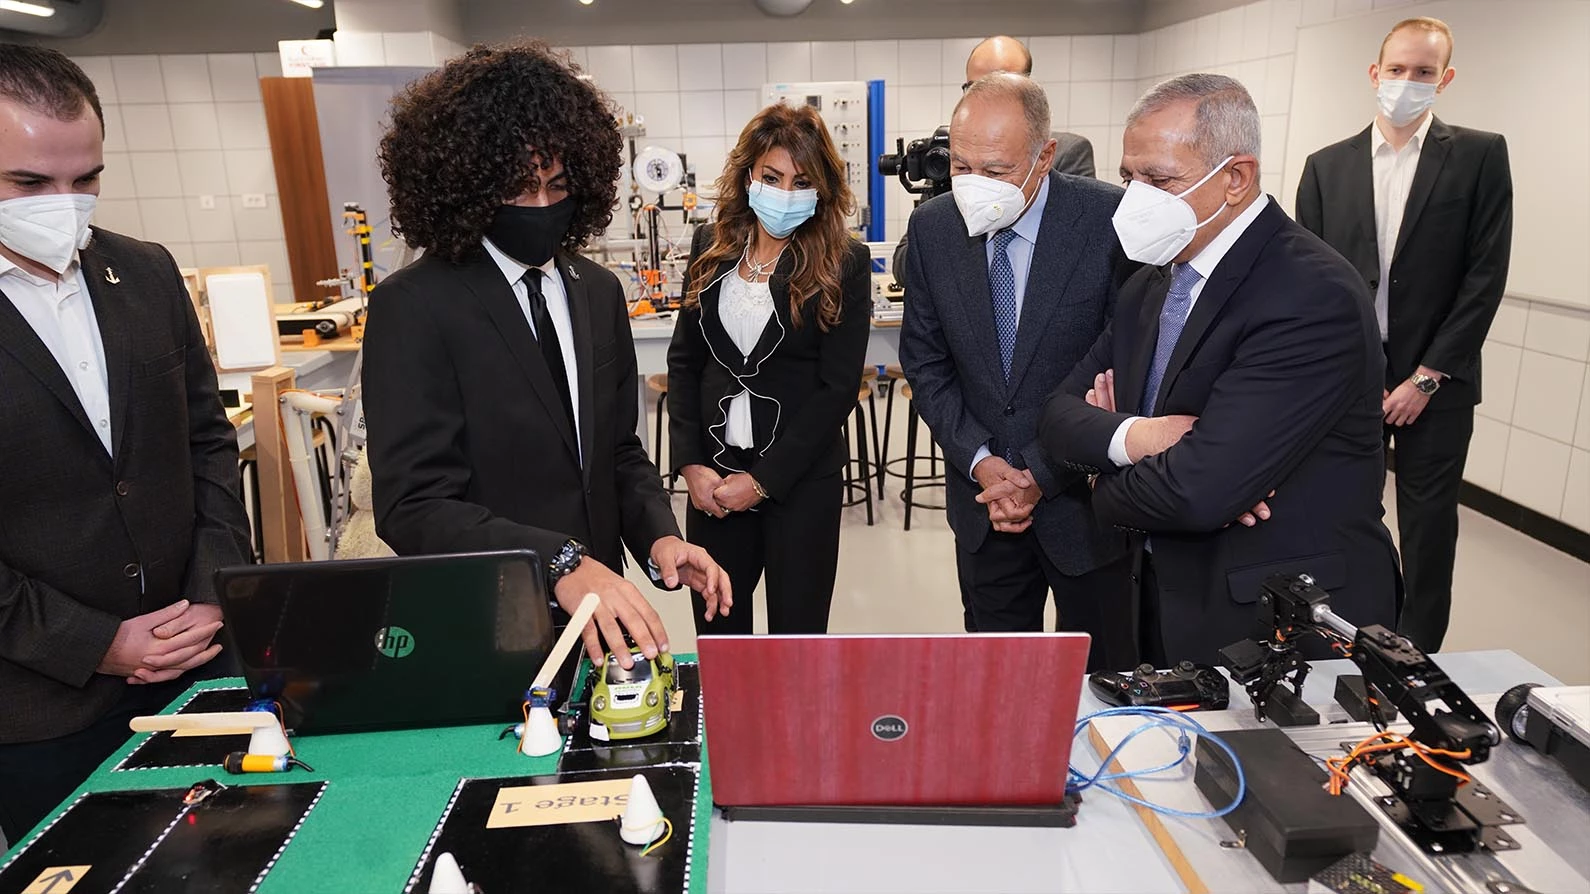 The Arab Academy at the Smart Village branch received His Excellency the Secretary General, Mr. Ahmed Aboul Gheit4